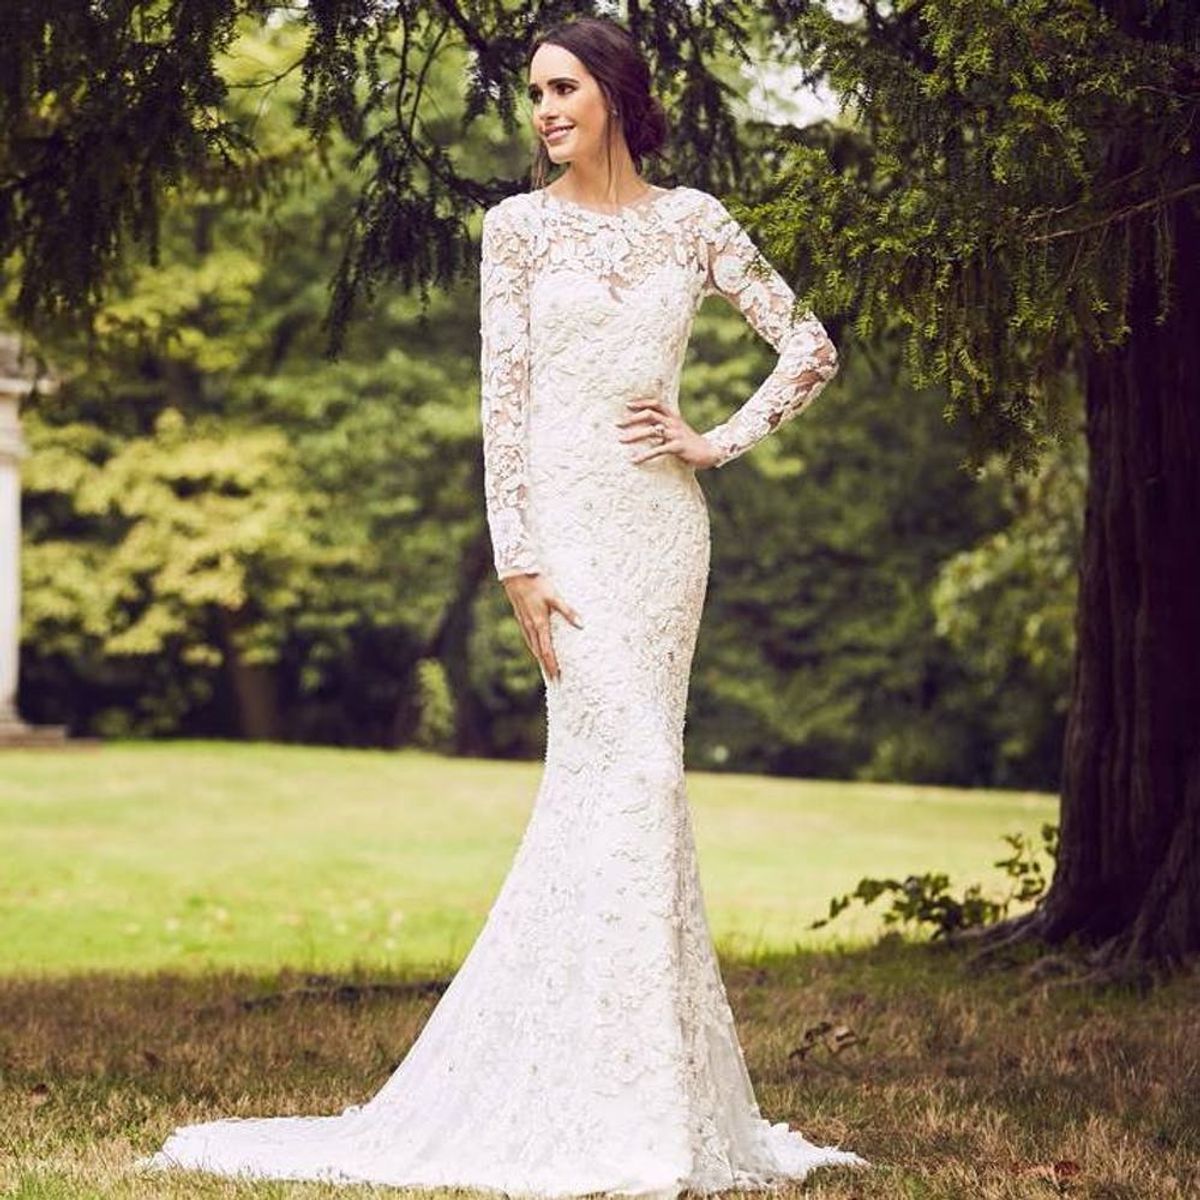 9 Winter Wedding Dresses That Will Make You Forget About the Cold